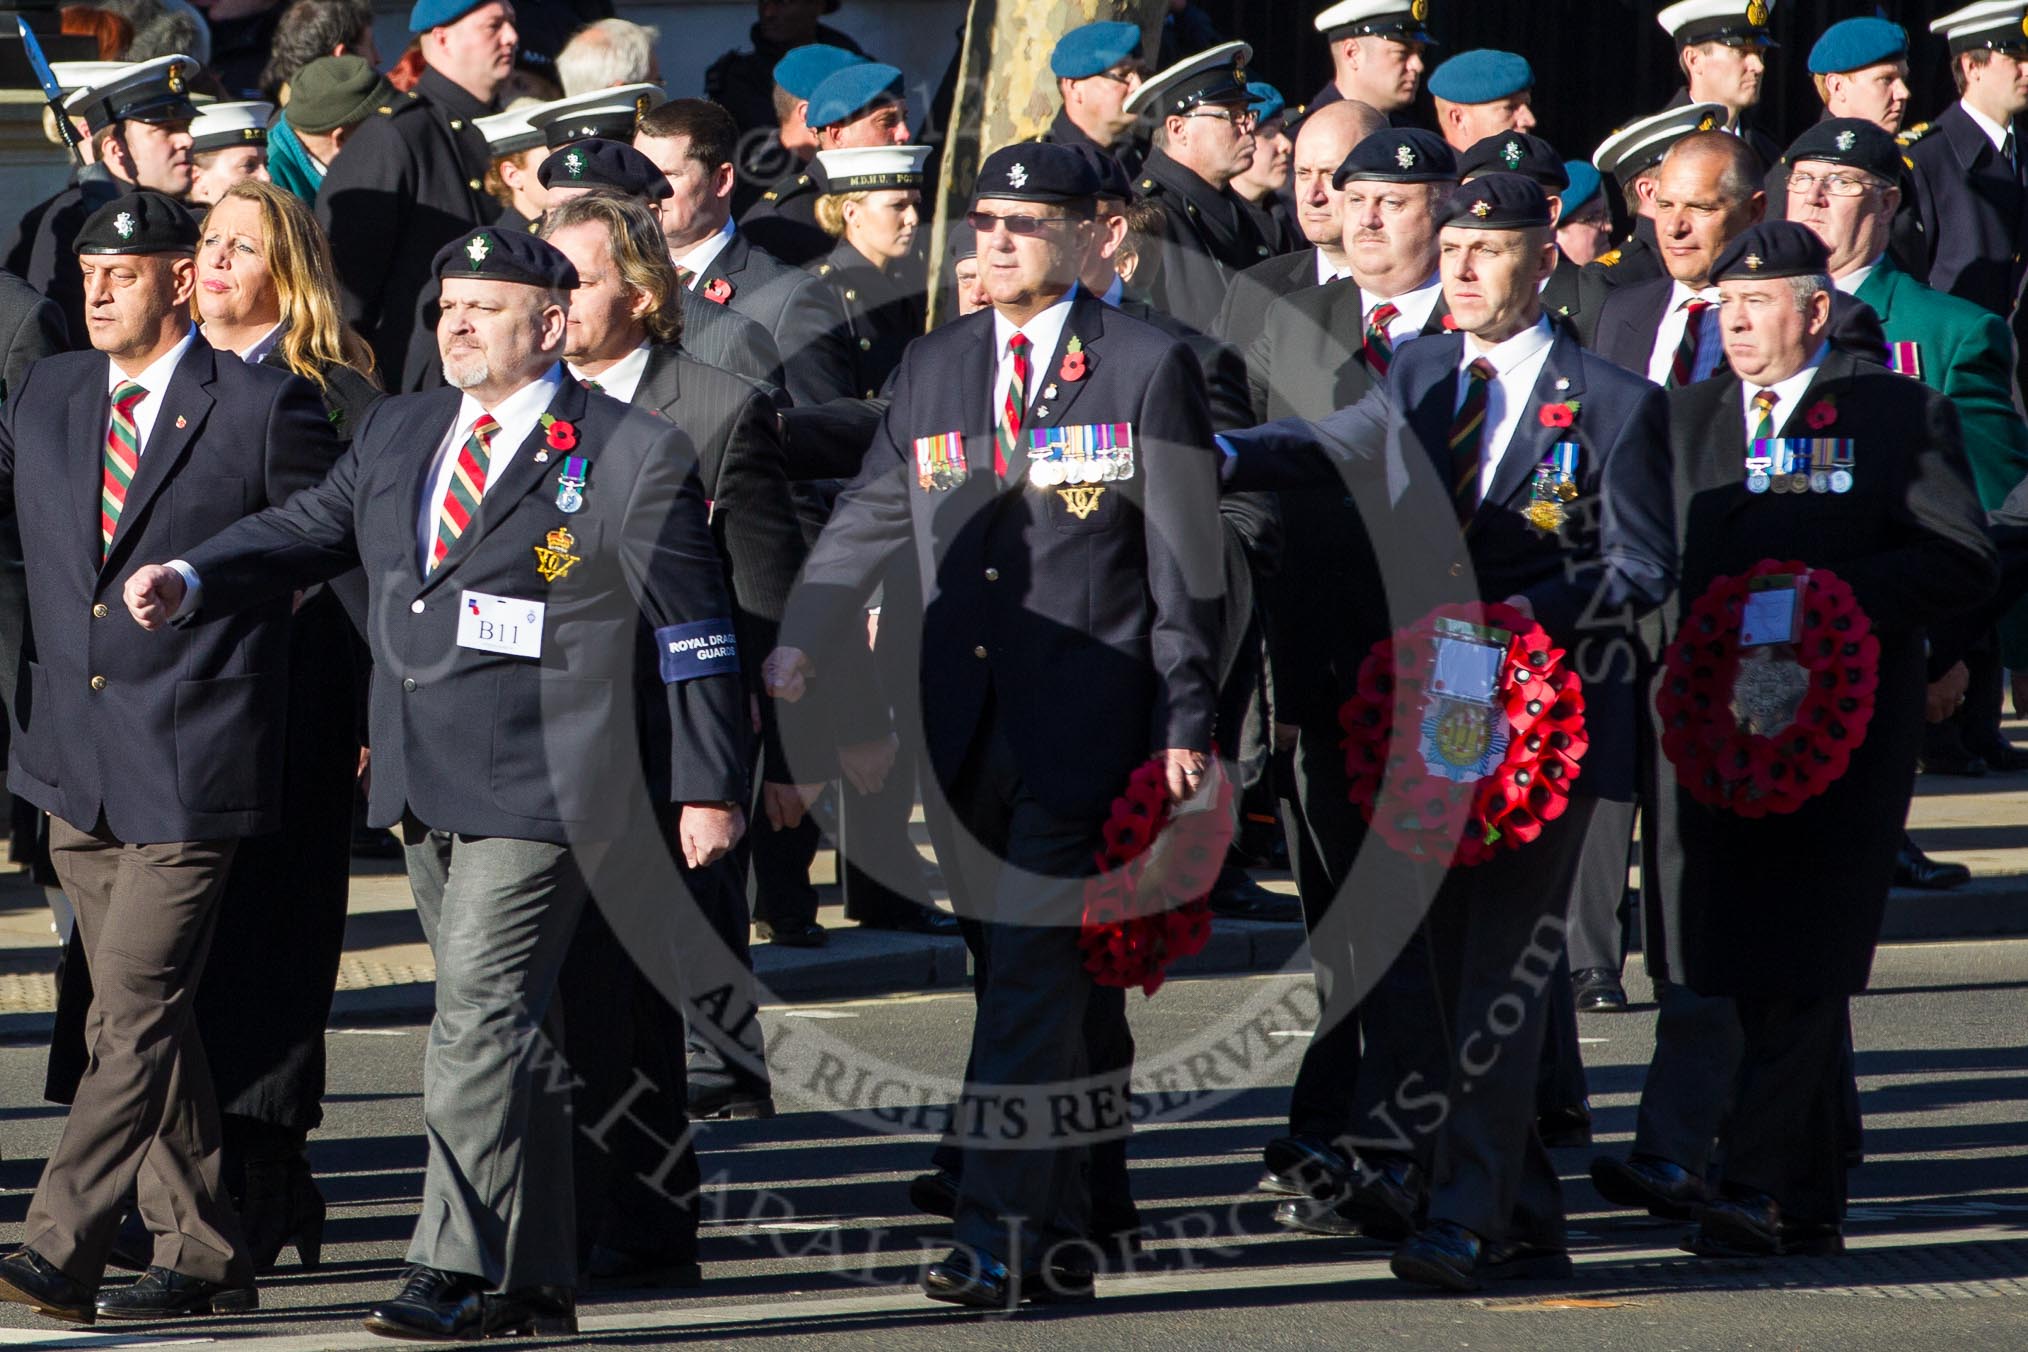 Remembrance Sunday 2012 Cenotaph March Past: Group  B11 - Royal Dragoon Guards ..
Whitehall, Cenotaph,
London SW1,

United Kingdom,
on 11 November 2012 at 11:56, image #869